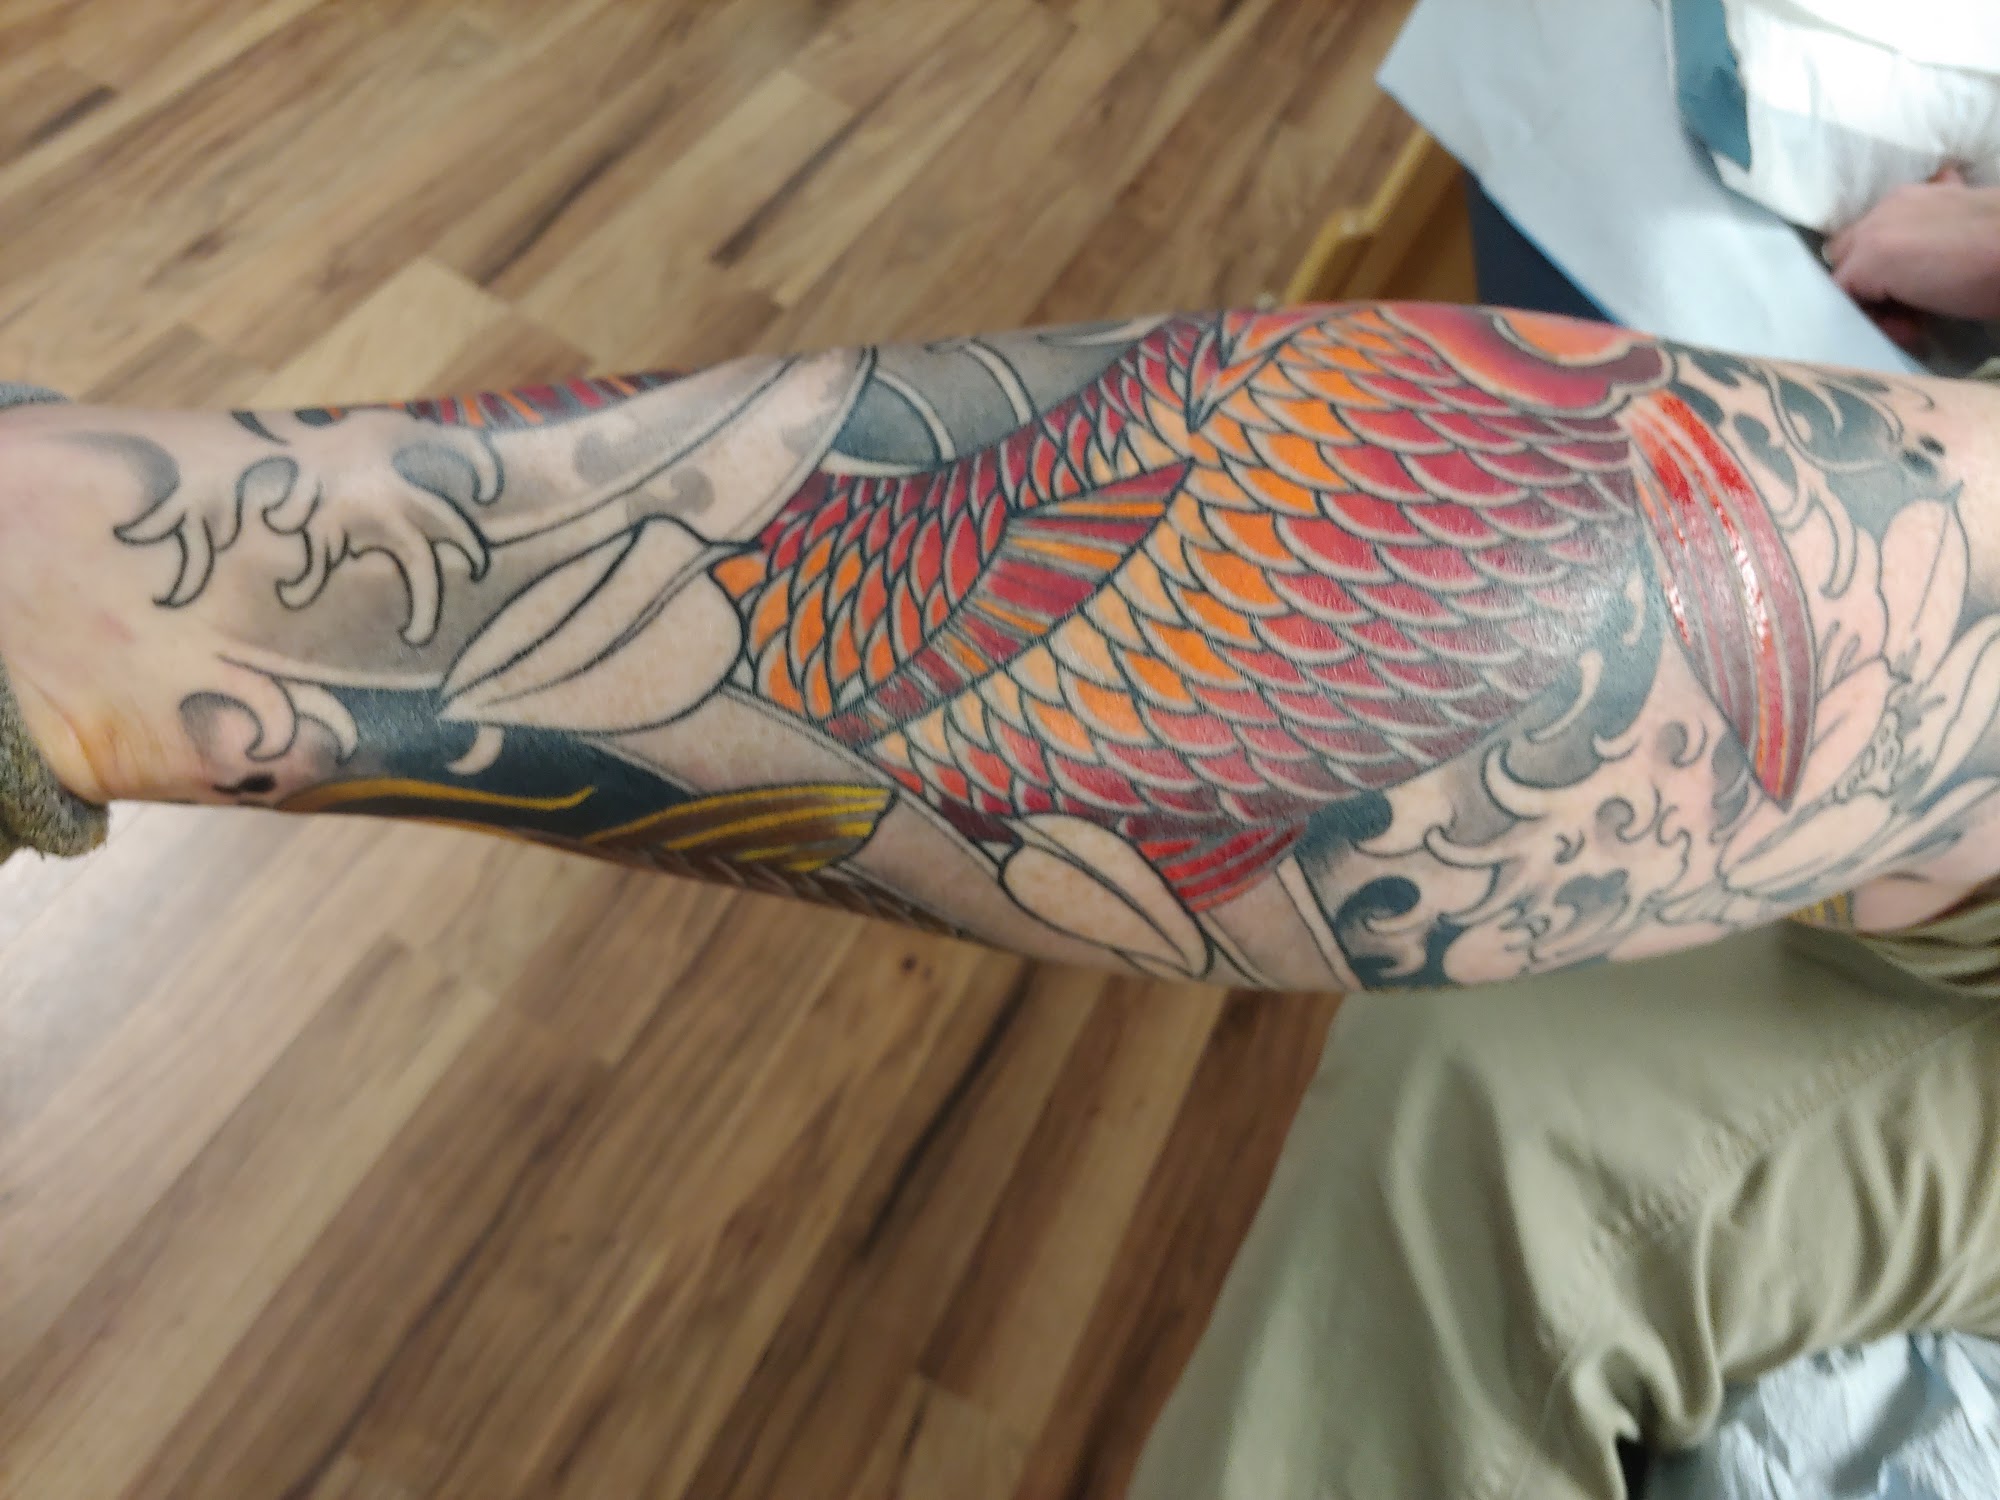 Best Tattoo Parlors in Des Moines Iowa